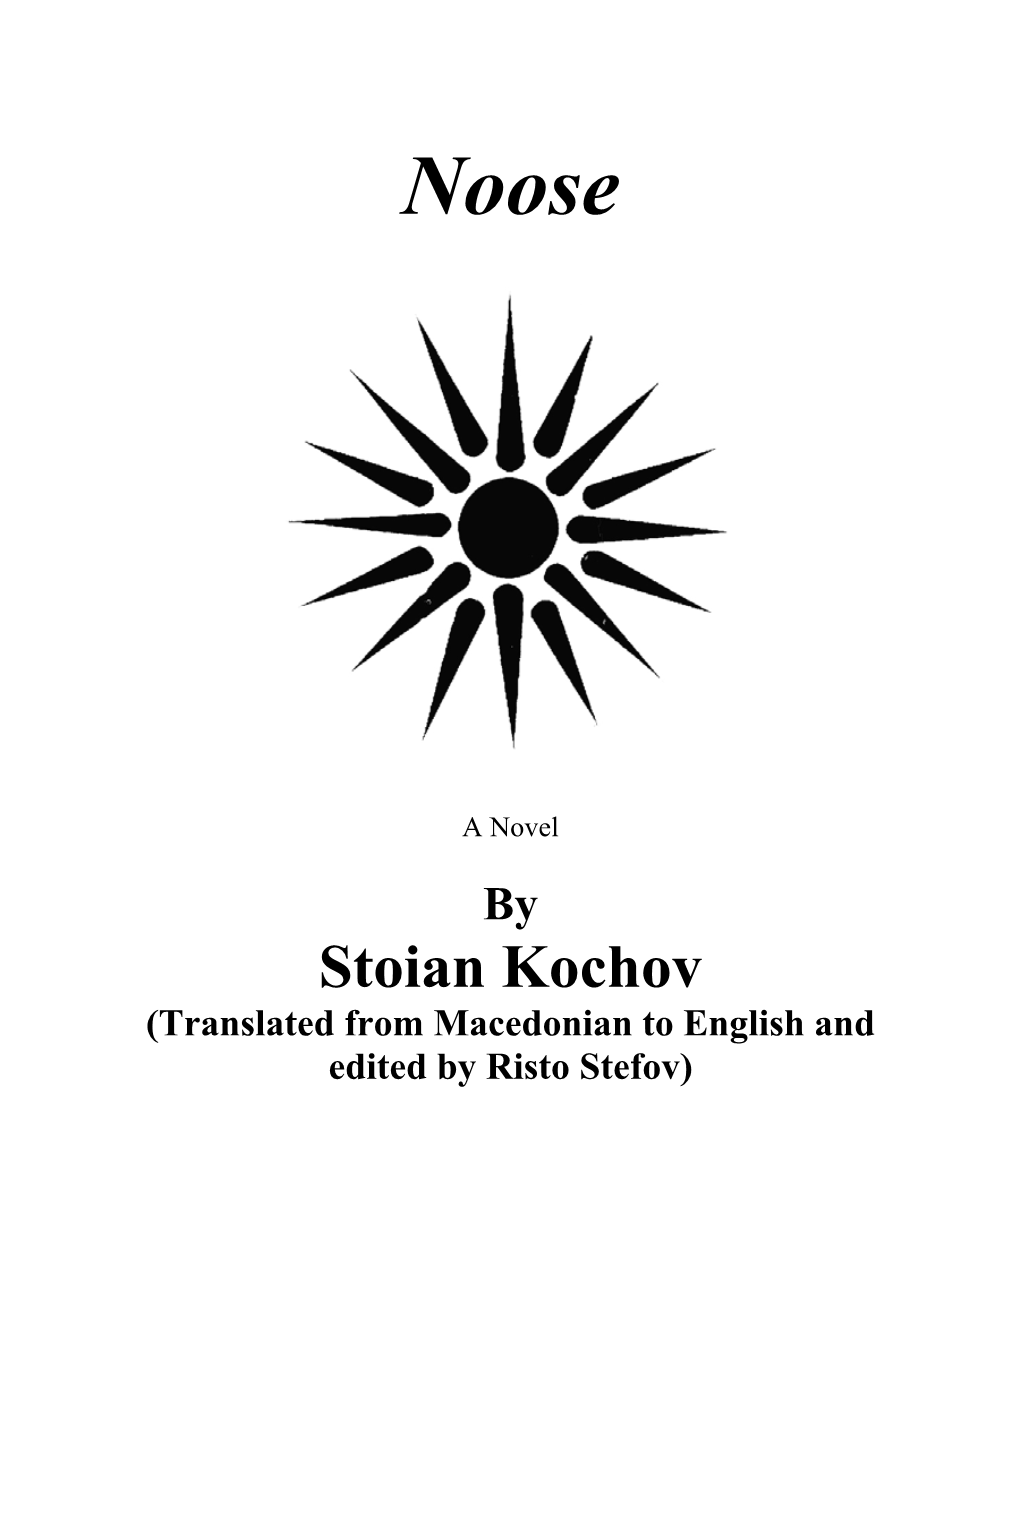 Stoian Kochov (Translated from Macedonian to English and Edited by Risto Stefov)